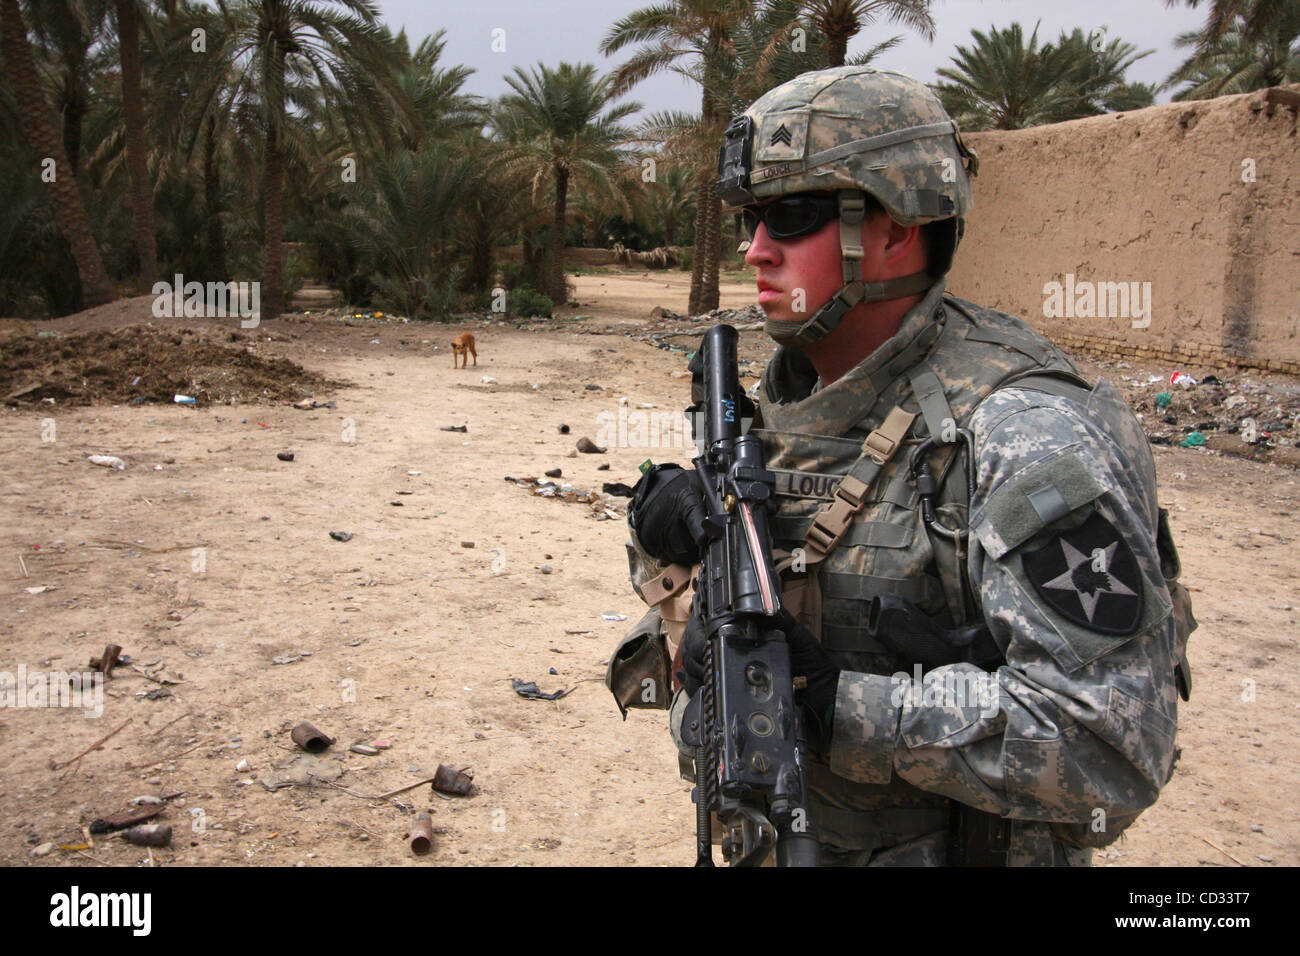 Apr 07, 2008 - Khalis, Diyala Province, Iraq - A soldier of 3rd Platoon, Cobra Troop, 2nd Squadron, 1st Cavalry Regiment as part of 4th Stryker Brigade Combat Team, 2nd Infantry Division patrols the town of Jadidah in Diyala province, Iraq. (Credit Image: © Simon Klingert/ZUMA Press) RESTRICTIONS: * Stock Photo